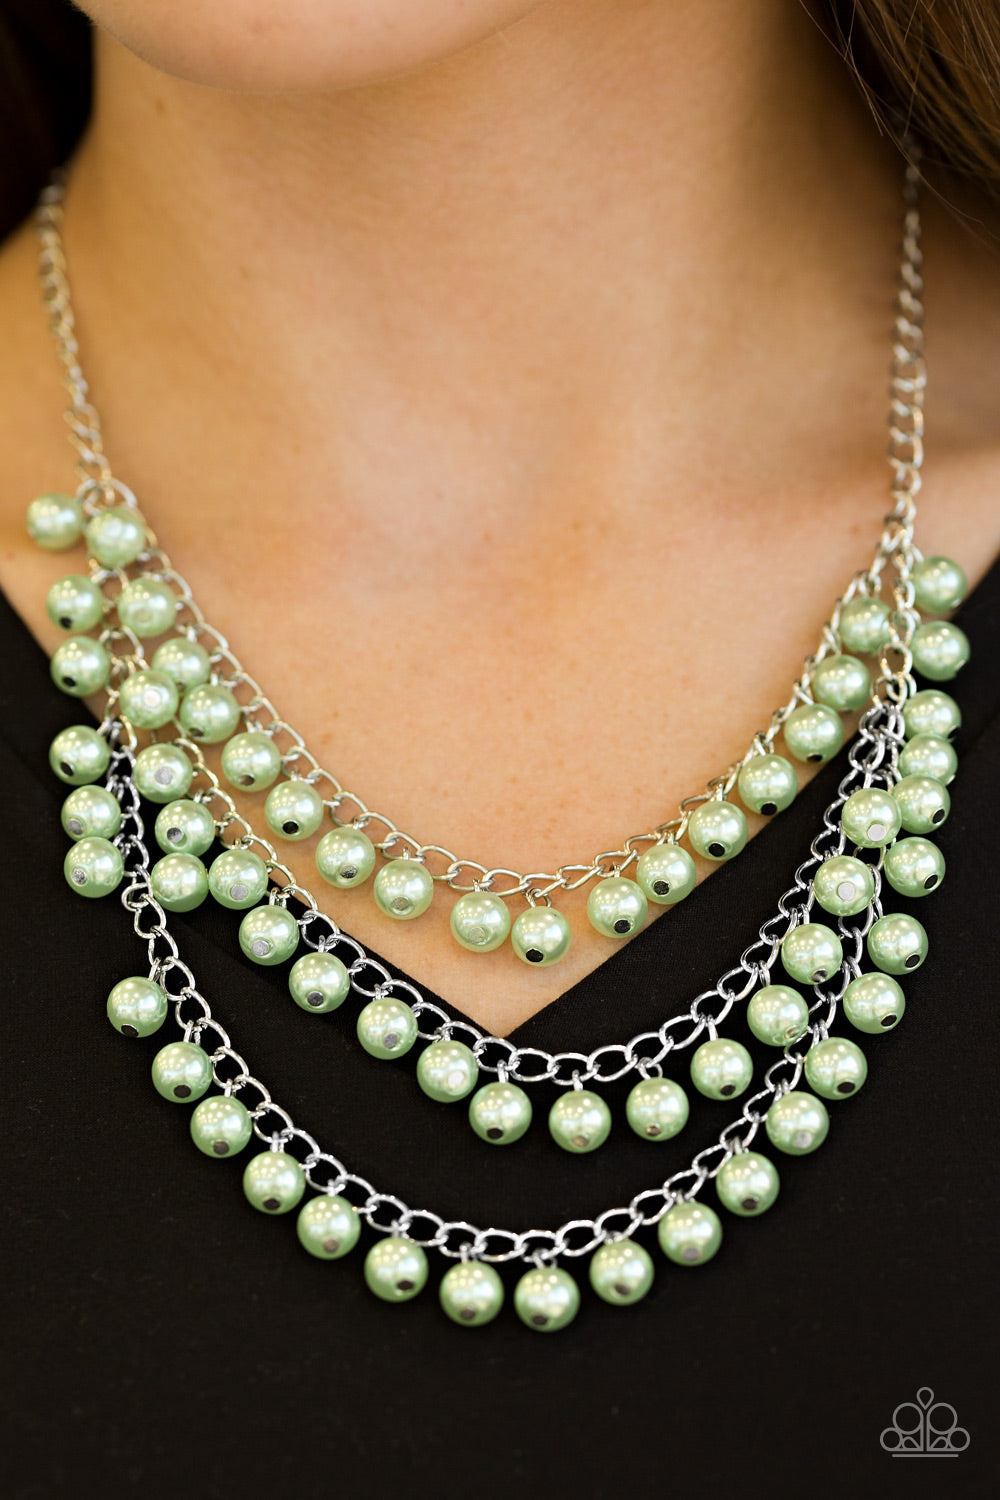 Paparazzi necklace - Chicly Classic - Green